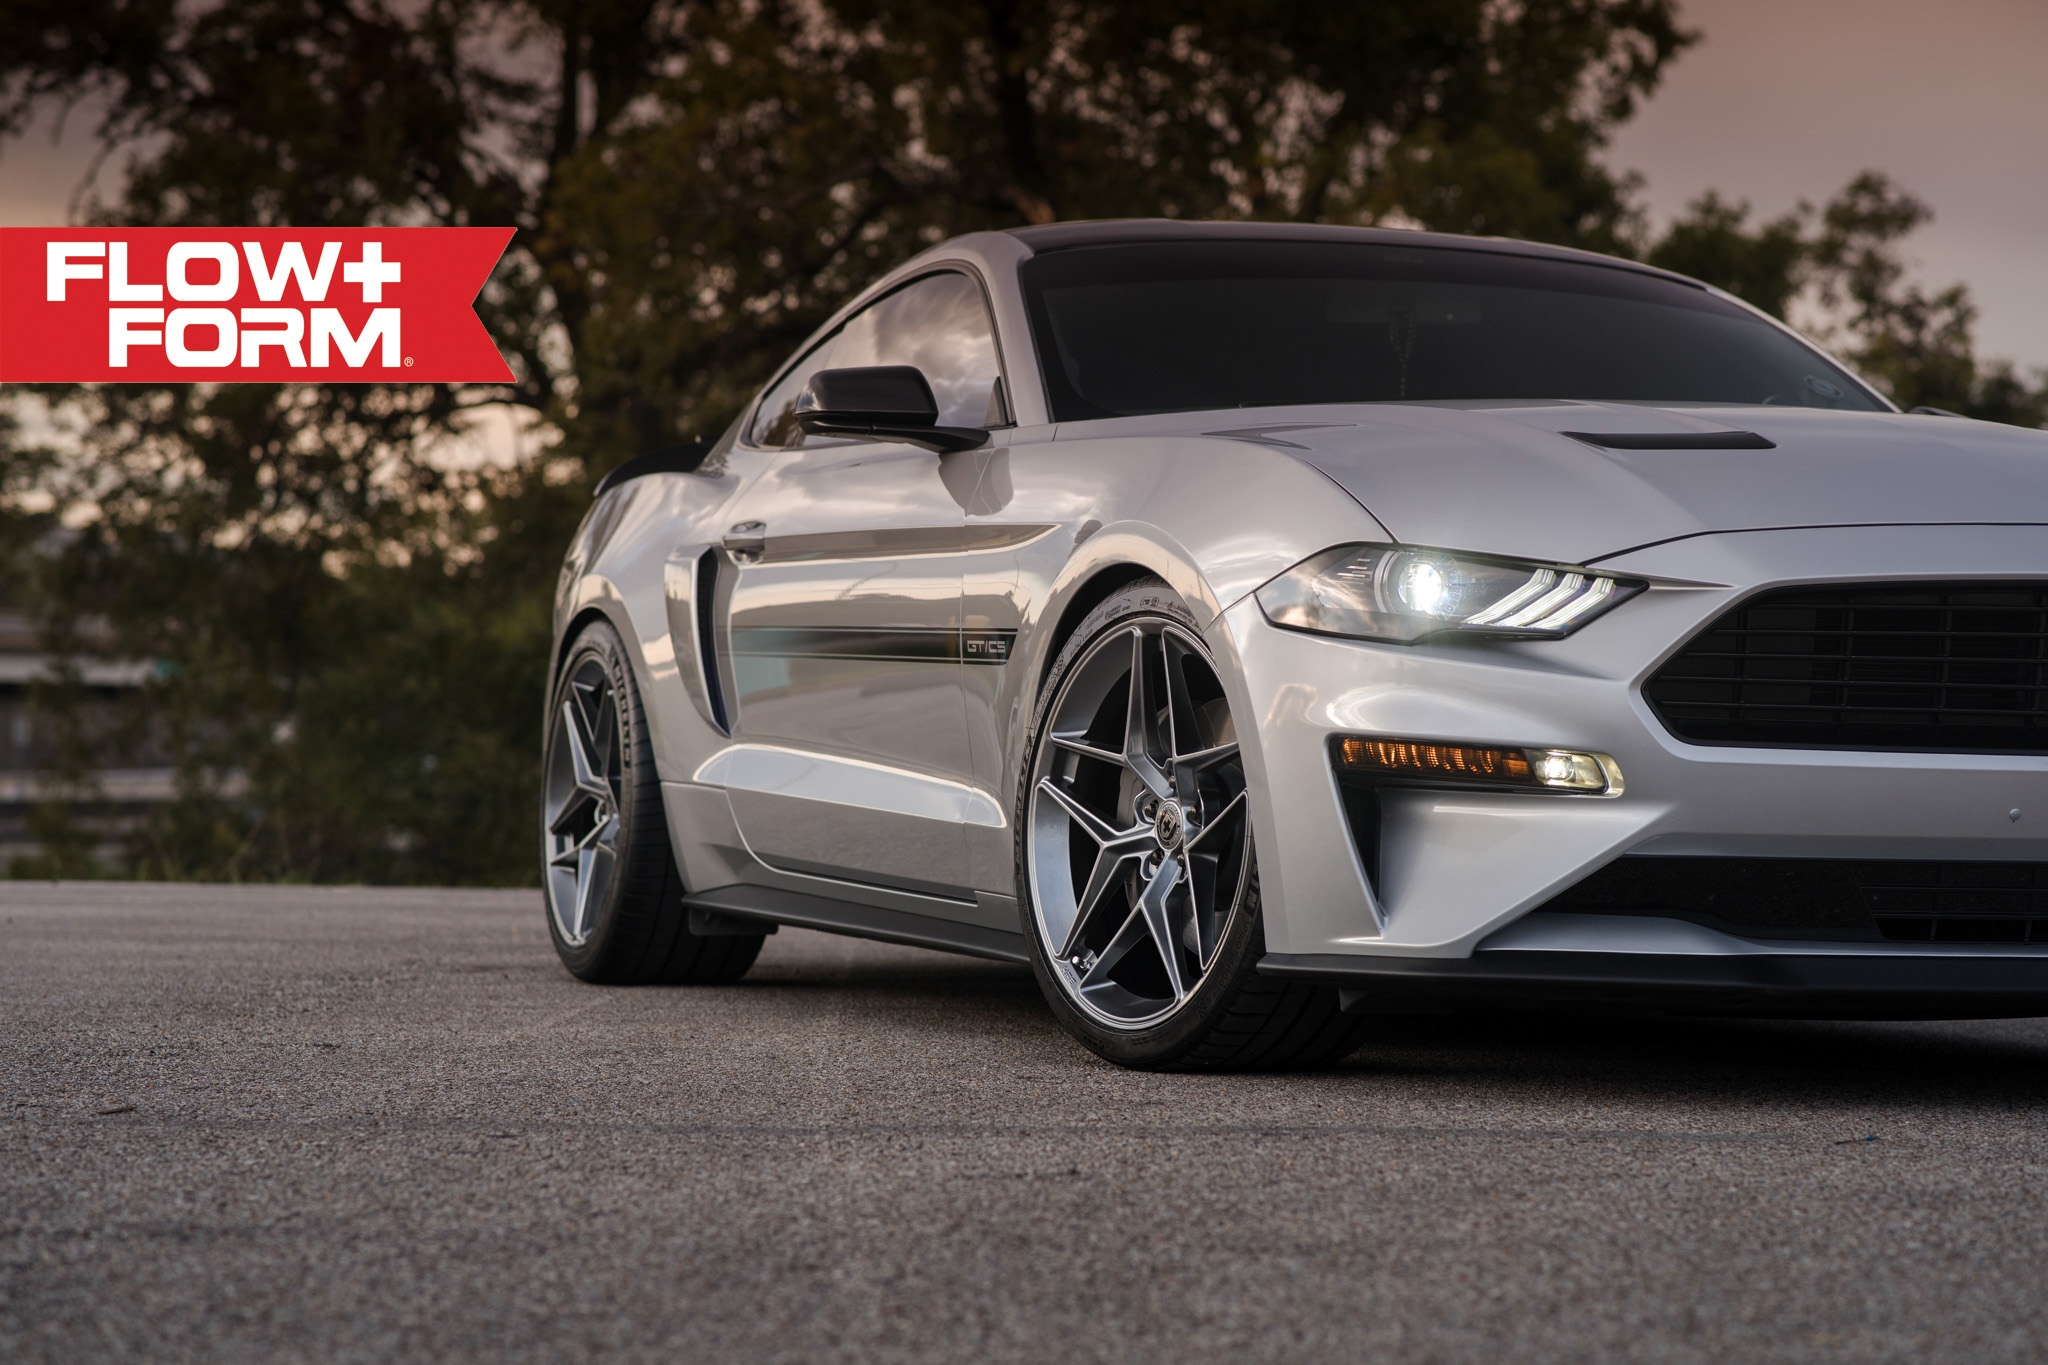 S650 Mustang UP TO $775 OFF on HRE Flow Form Wheels - HRE FF28 FF21 FF11 FF10 FF04 - Vibe Motorsports 2